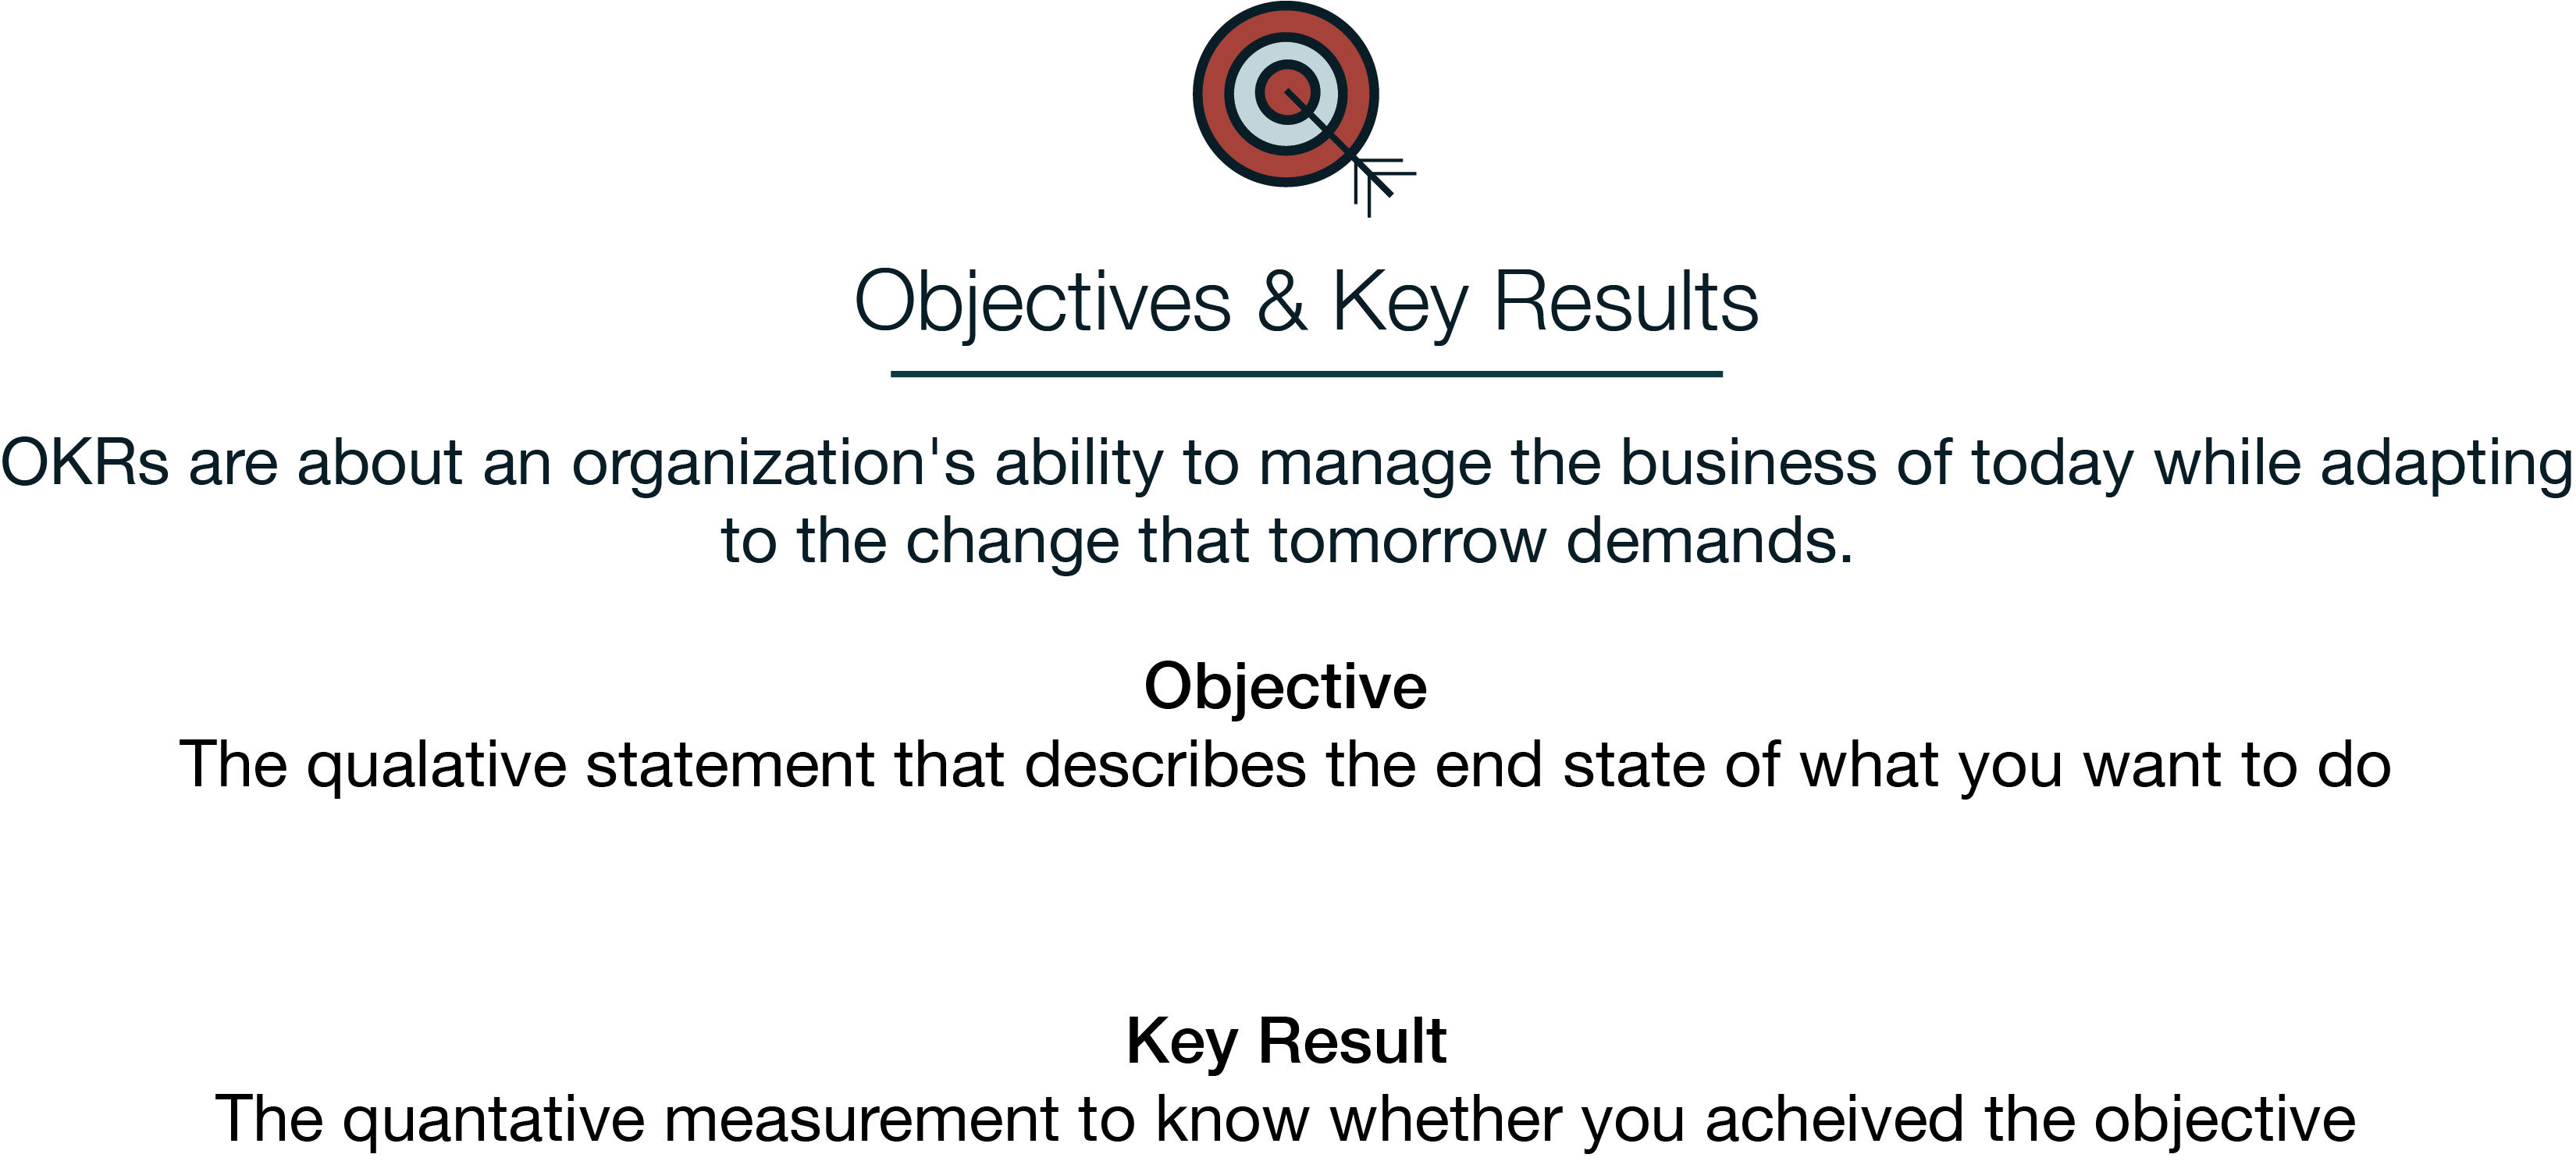 Objectives and Key Reseults or OKRs. OKRs are about an organization's ability to manage the business of today
      while adapting to the change that tomorrow demands. Objectives are The qualative statement that describes the end state of what you want to do. Key Results are the quantative measurement to track your progress and know whether you acheived the objective
    OKRs are a management and communication framework to help companies